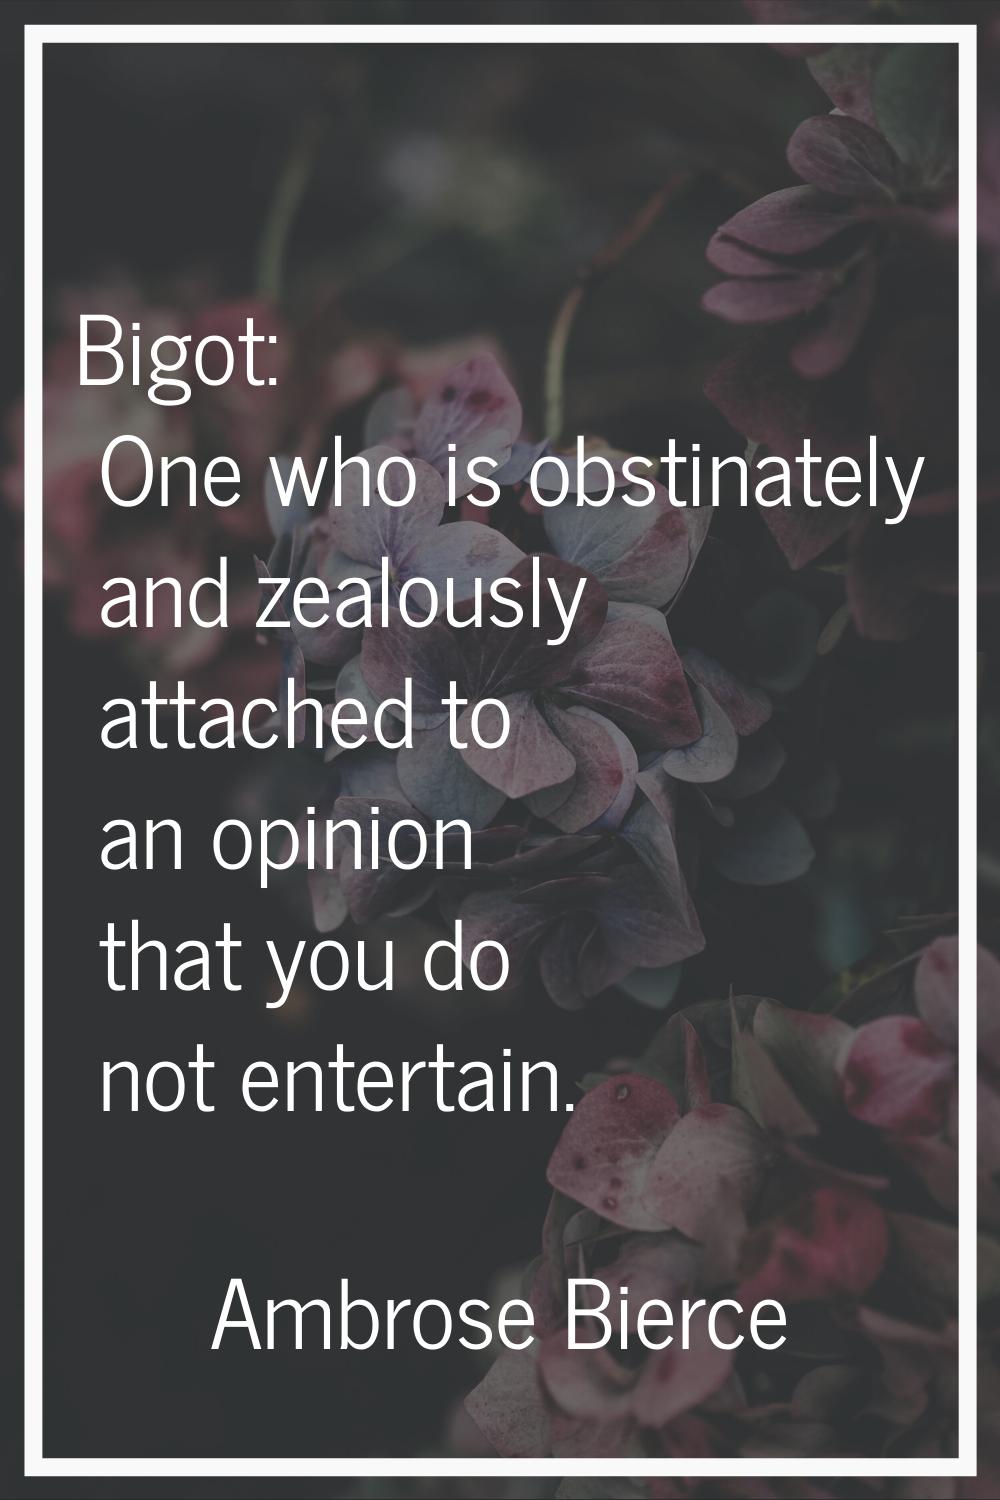 Bigot: One who is obstinately and zealously attached to an opinion that you do not entertain.